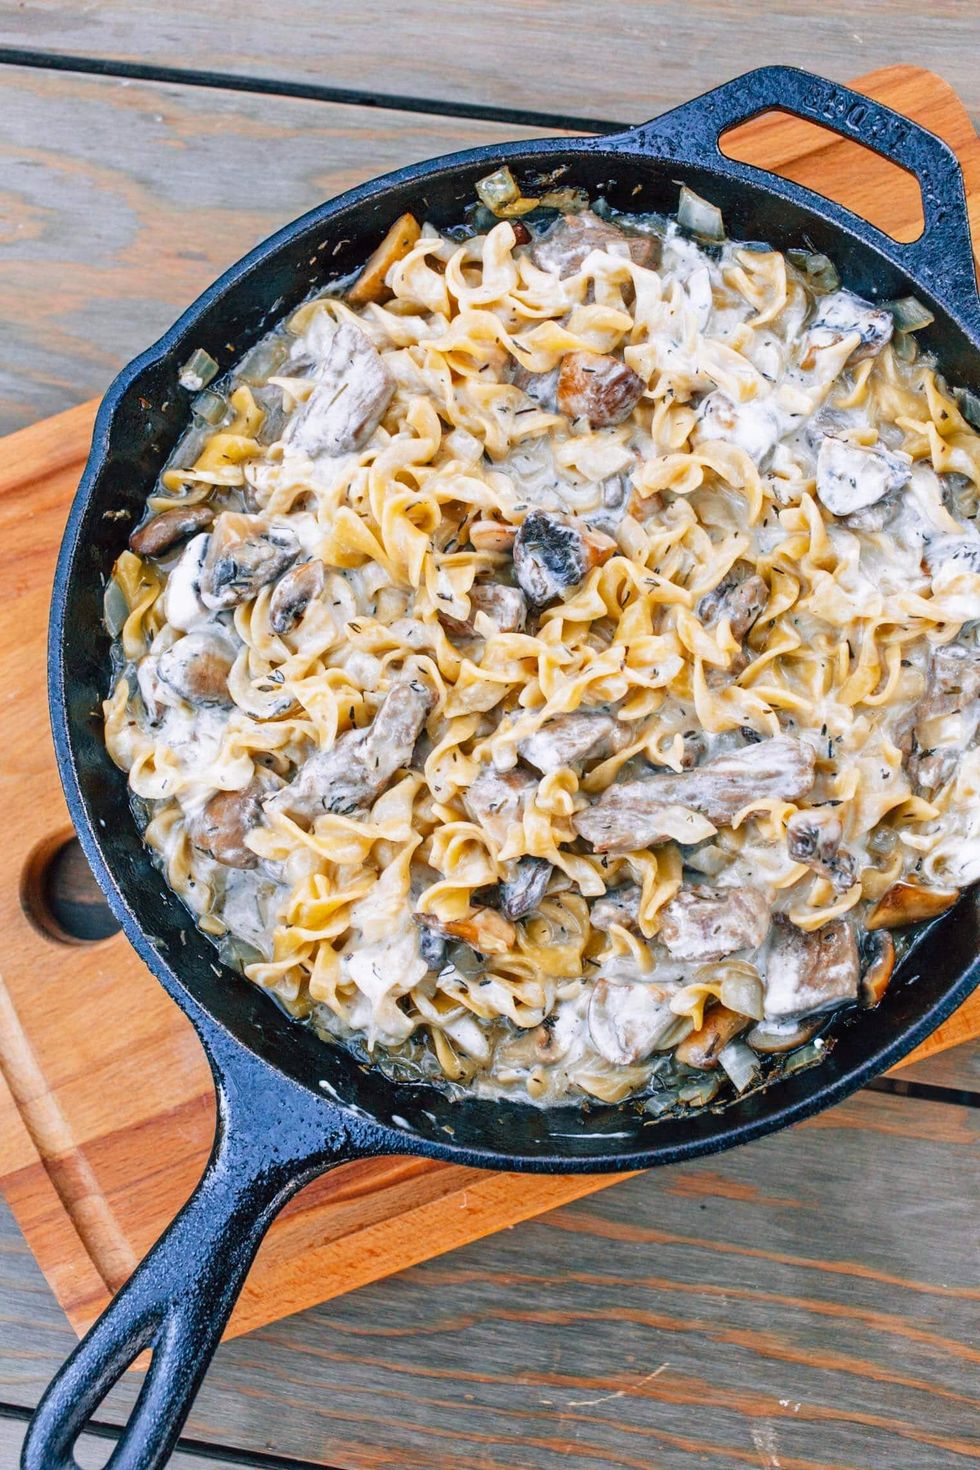 Cast iron skillet beef stroganoff is one of our favorite easy camping foods